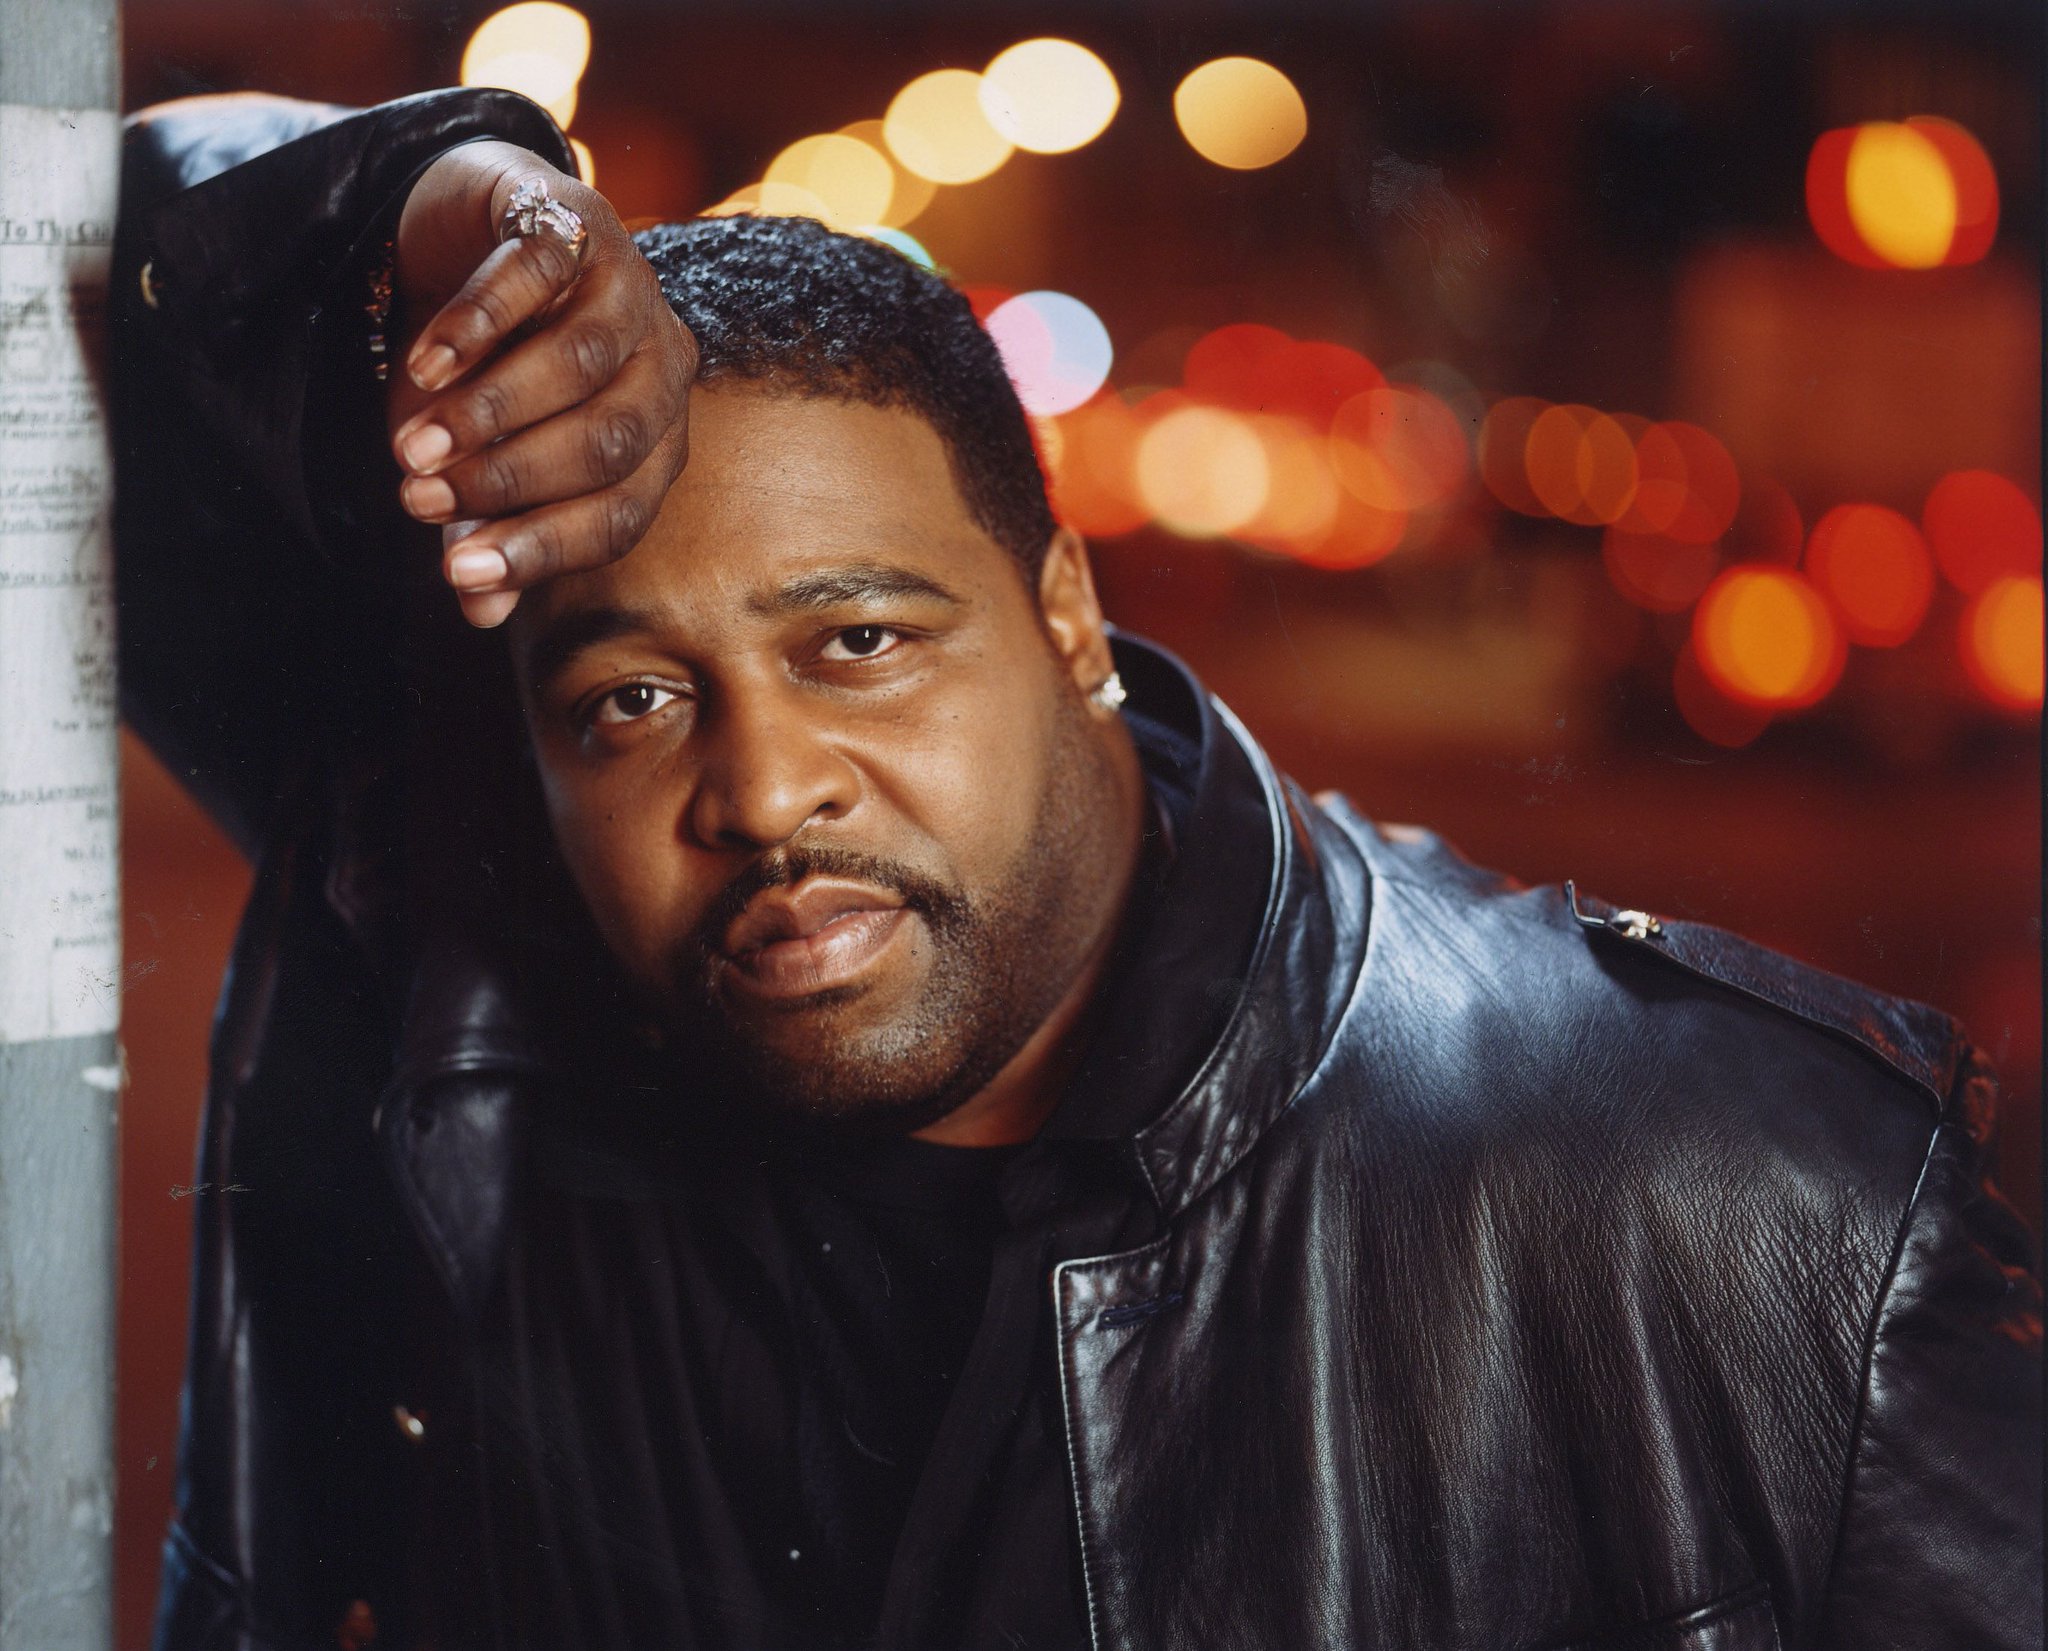 Happy Birthday to the late great Gerald Levert. He would have been 52 today. 